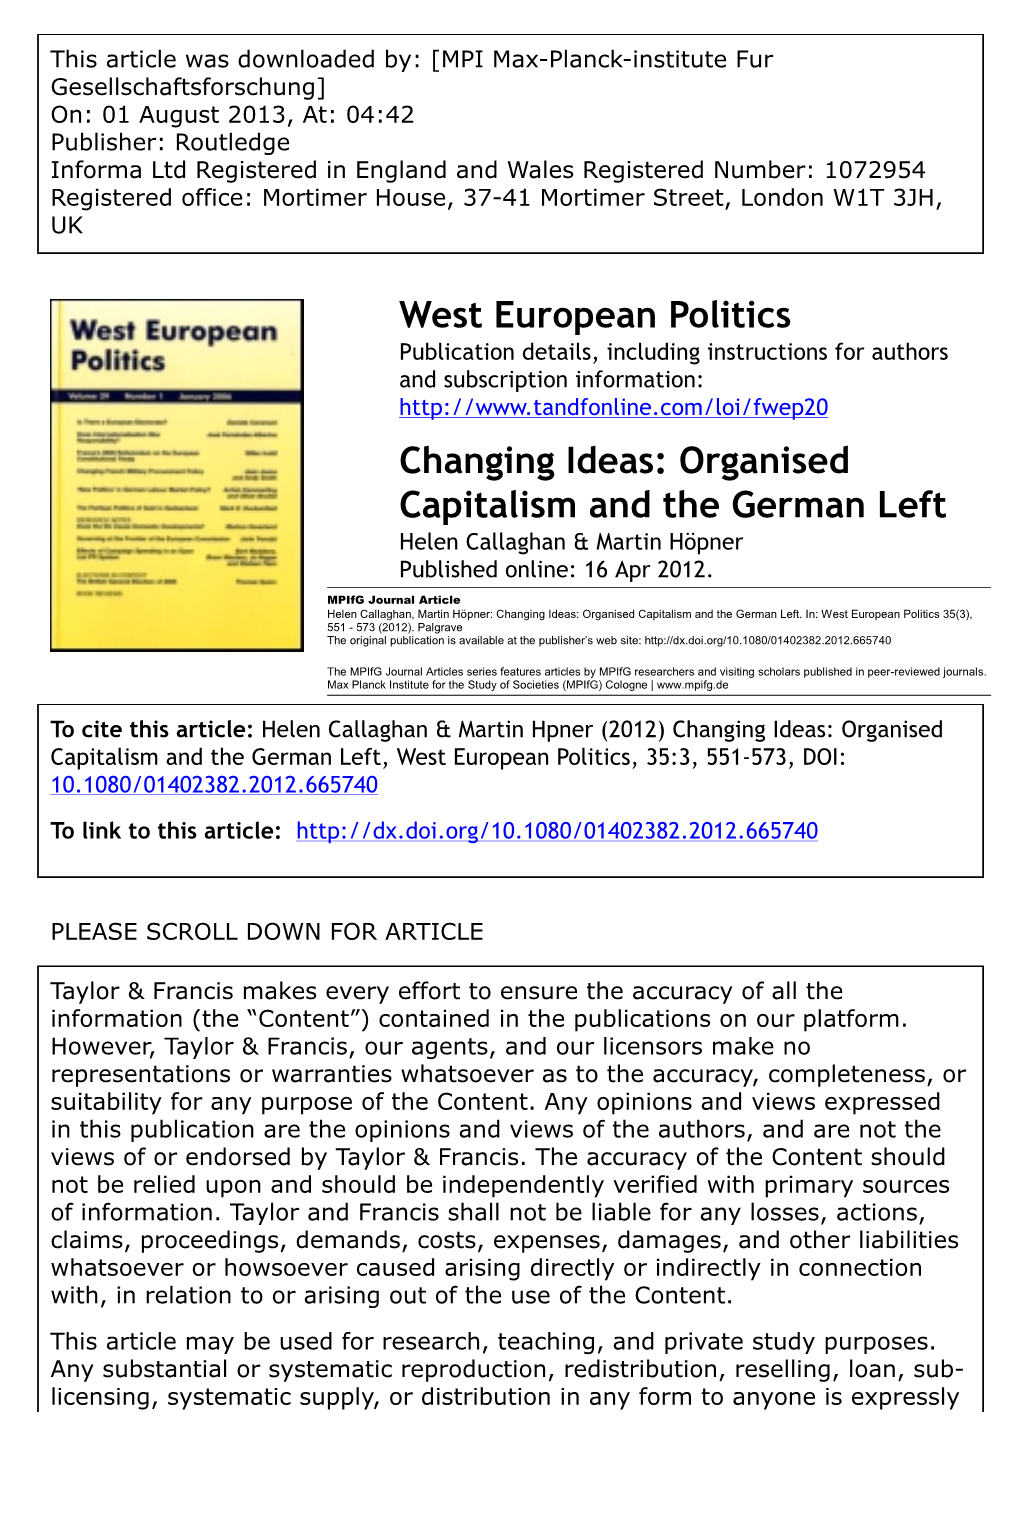 Organised Capitalism and the German Left Helen Callaghan & Martin Höpner Published Online: 16 Apr 2012